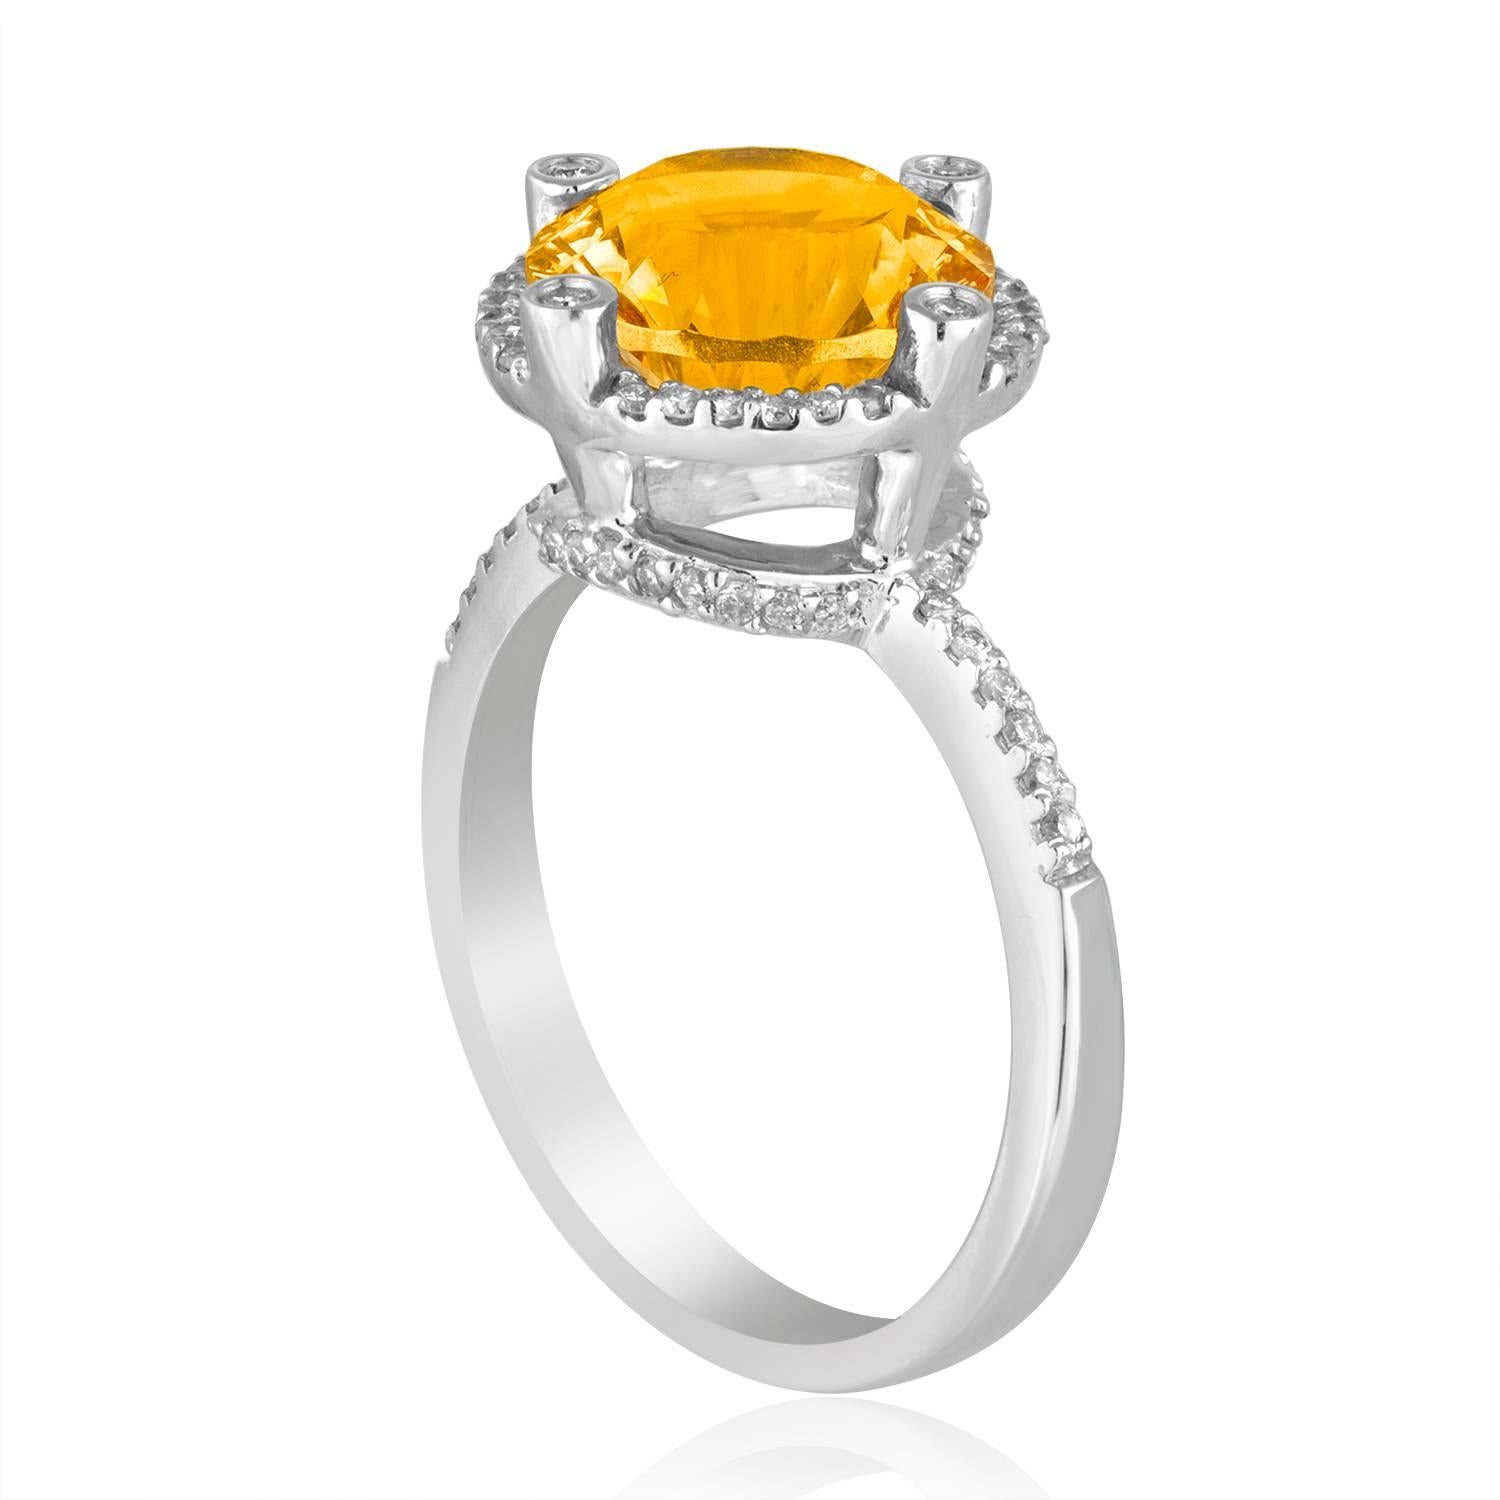 Stunning Citrine Ring
The ring is 14K White Gold
There are 0.27 Carats In Diamonds H/I I1
The Round Citrine is a Millennium Cut 3.11 Carats
The top measures 1/2